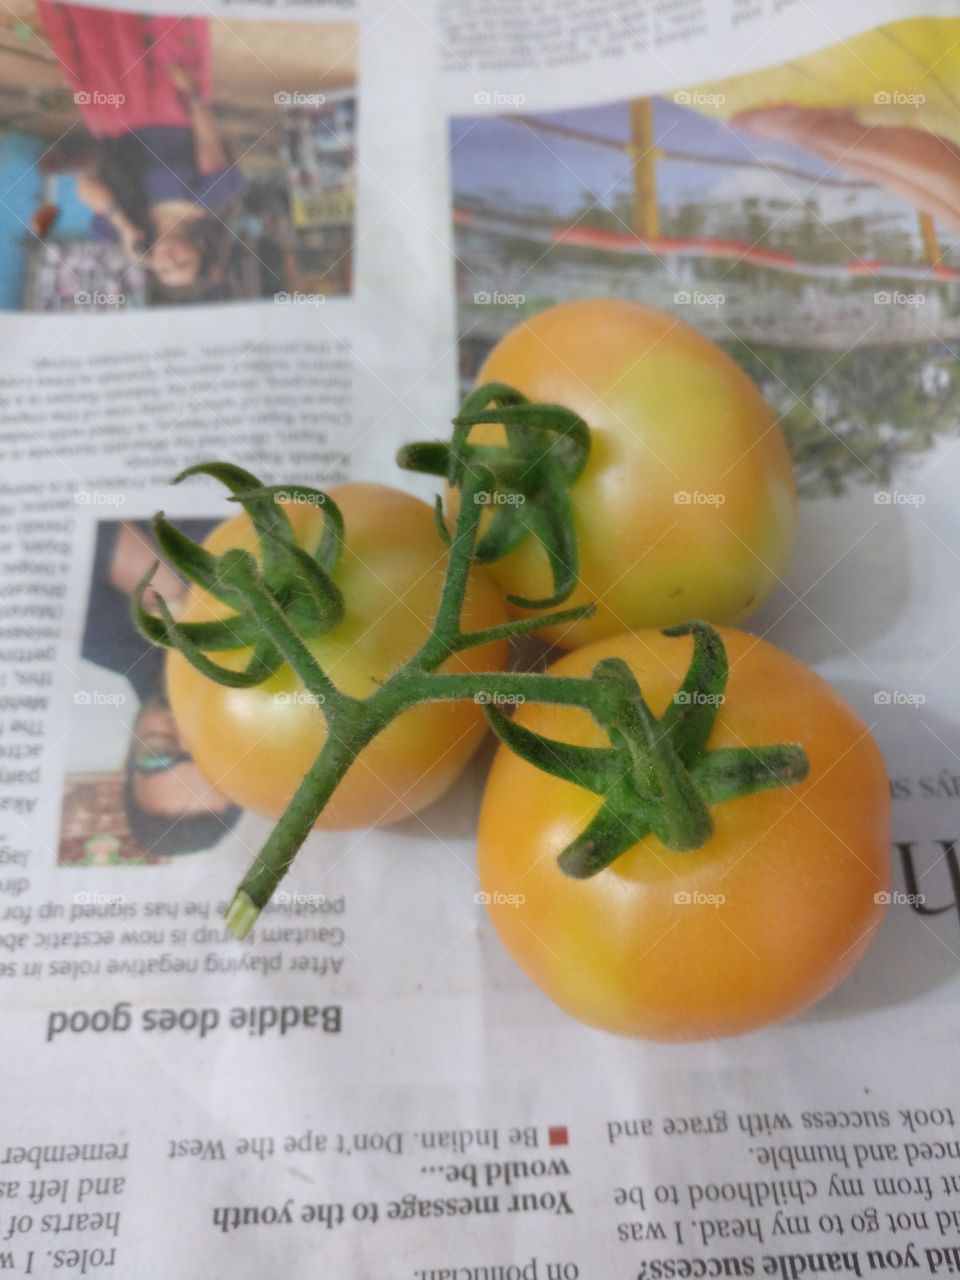 Tomatoes.. Not so ripe